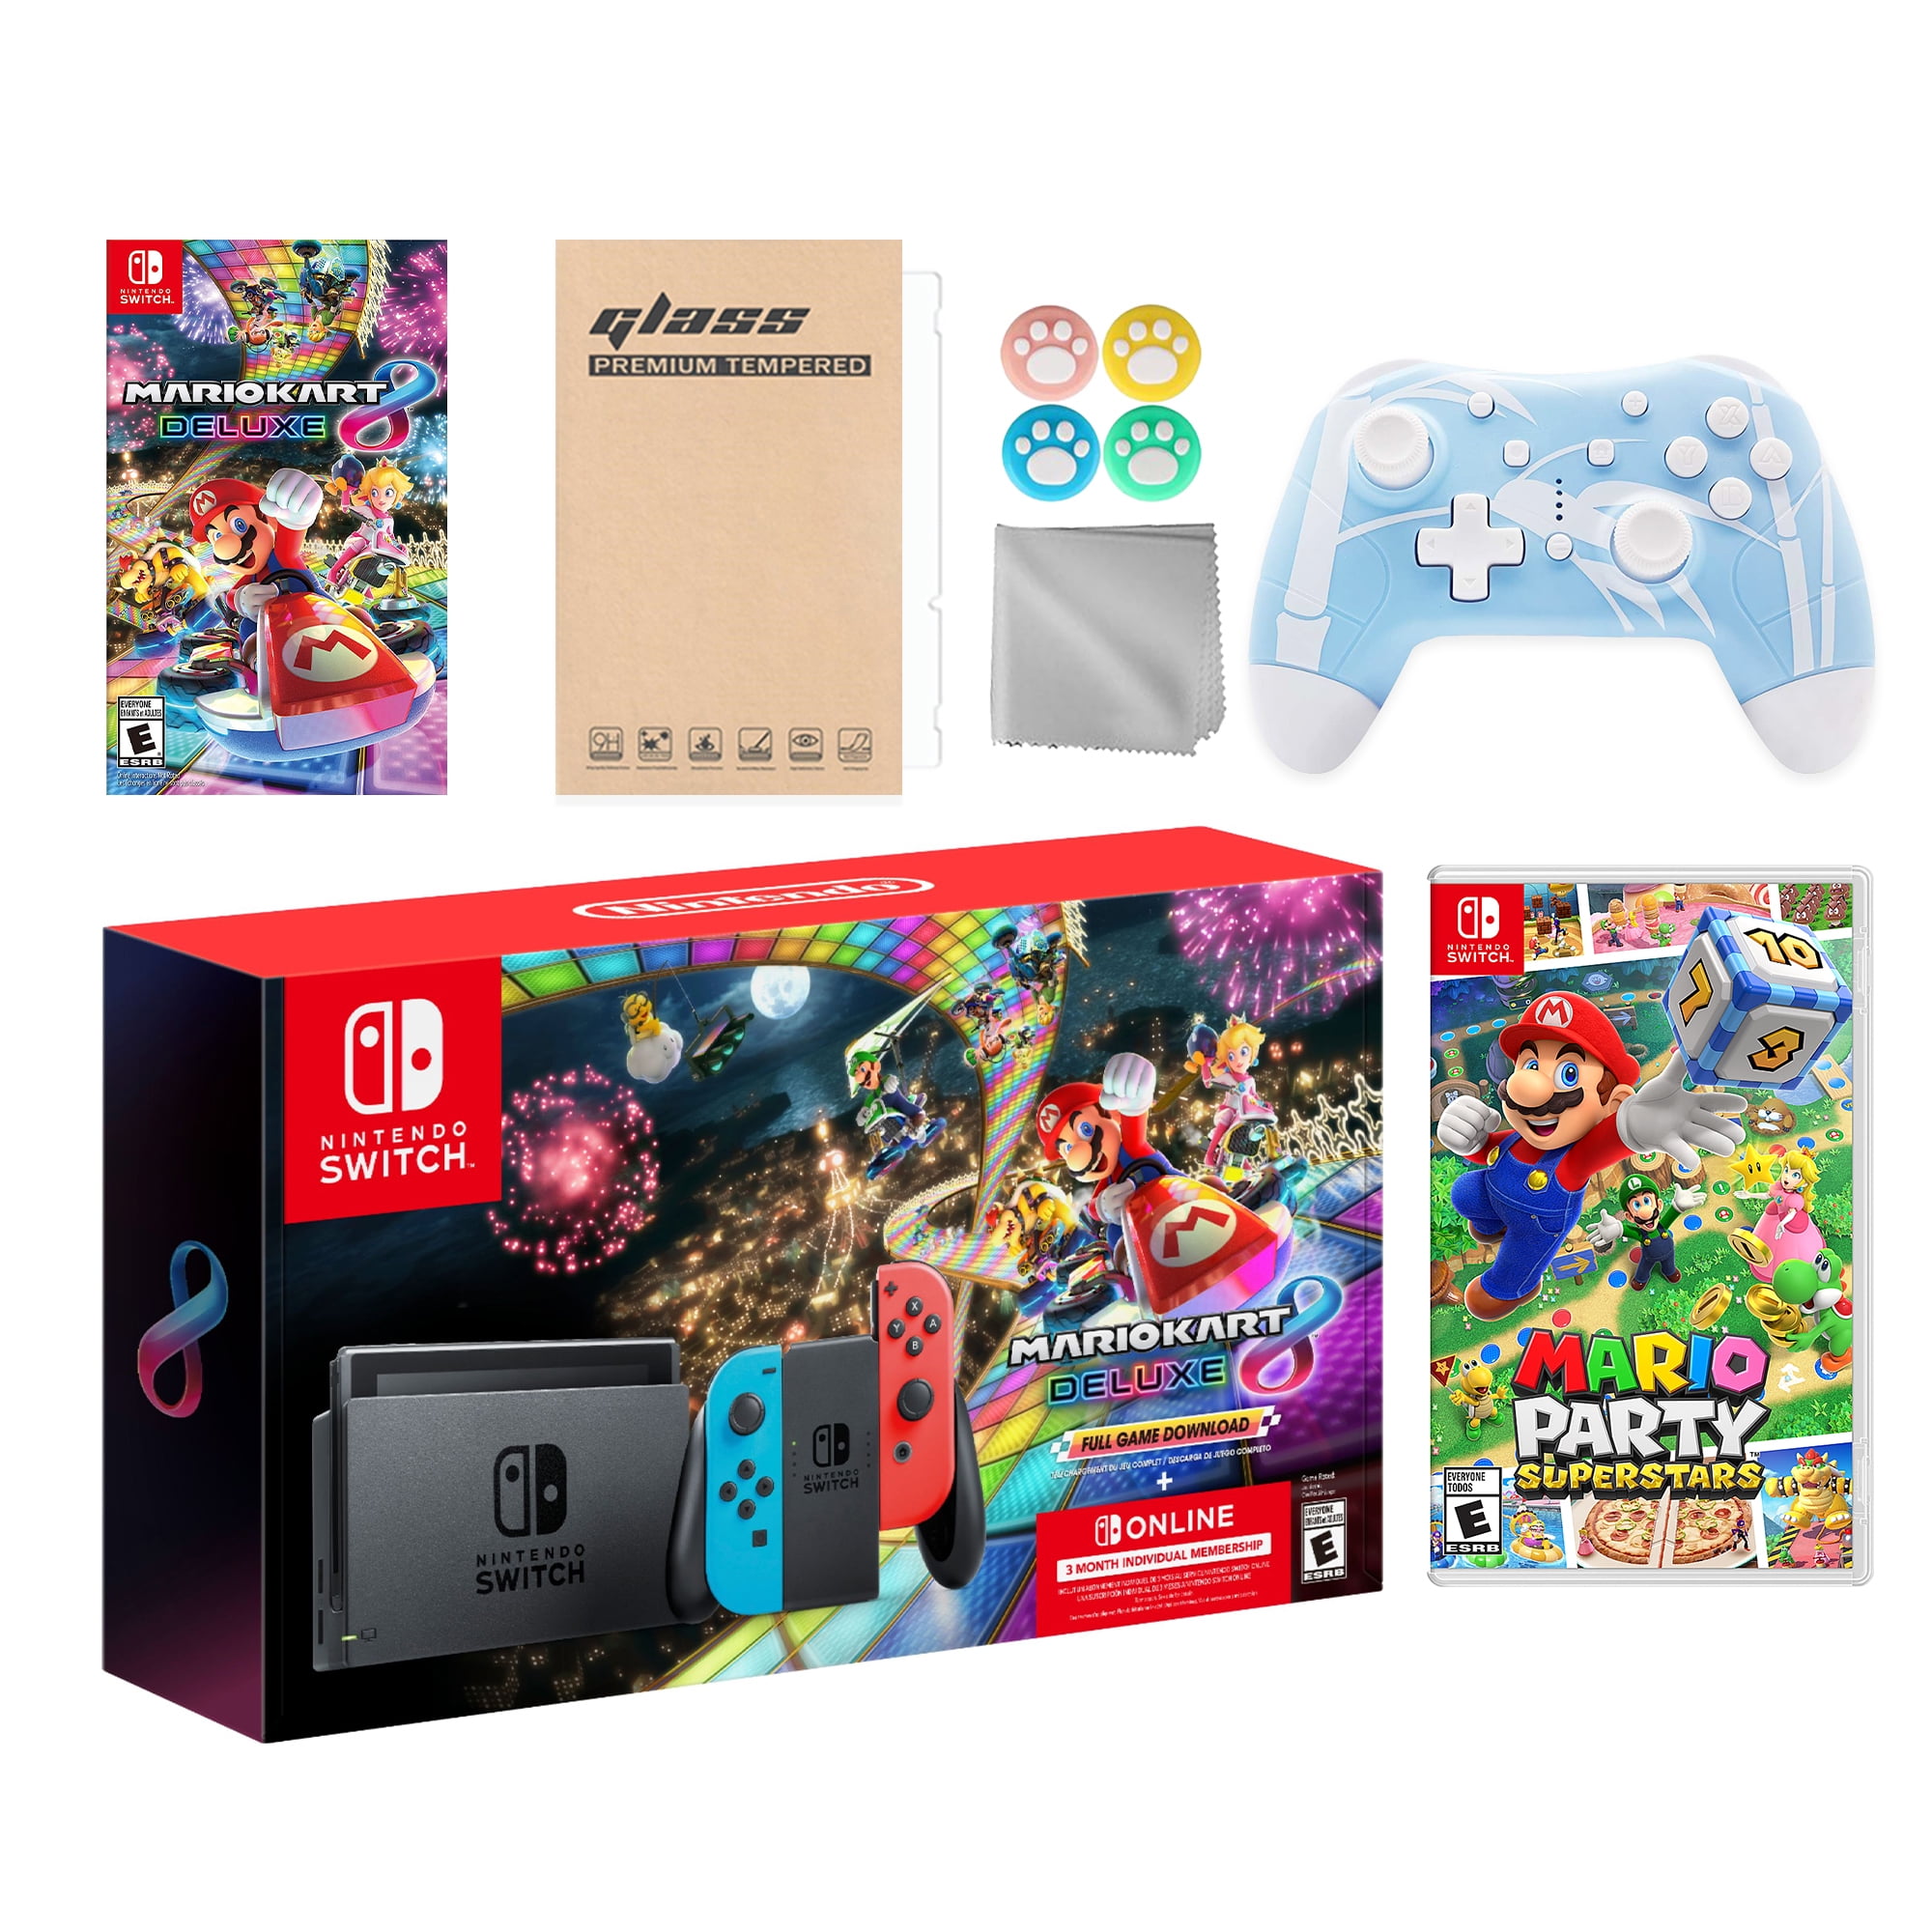 Console Nintendo Switch + Mario Kart 8 Deluxe - Player Games